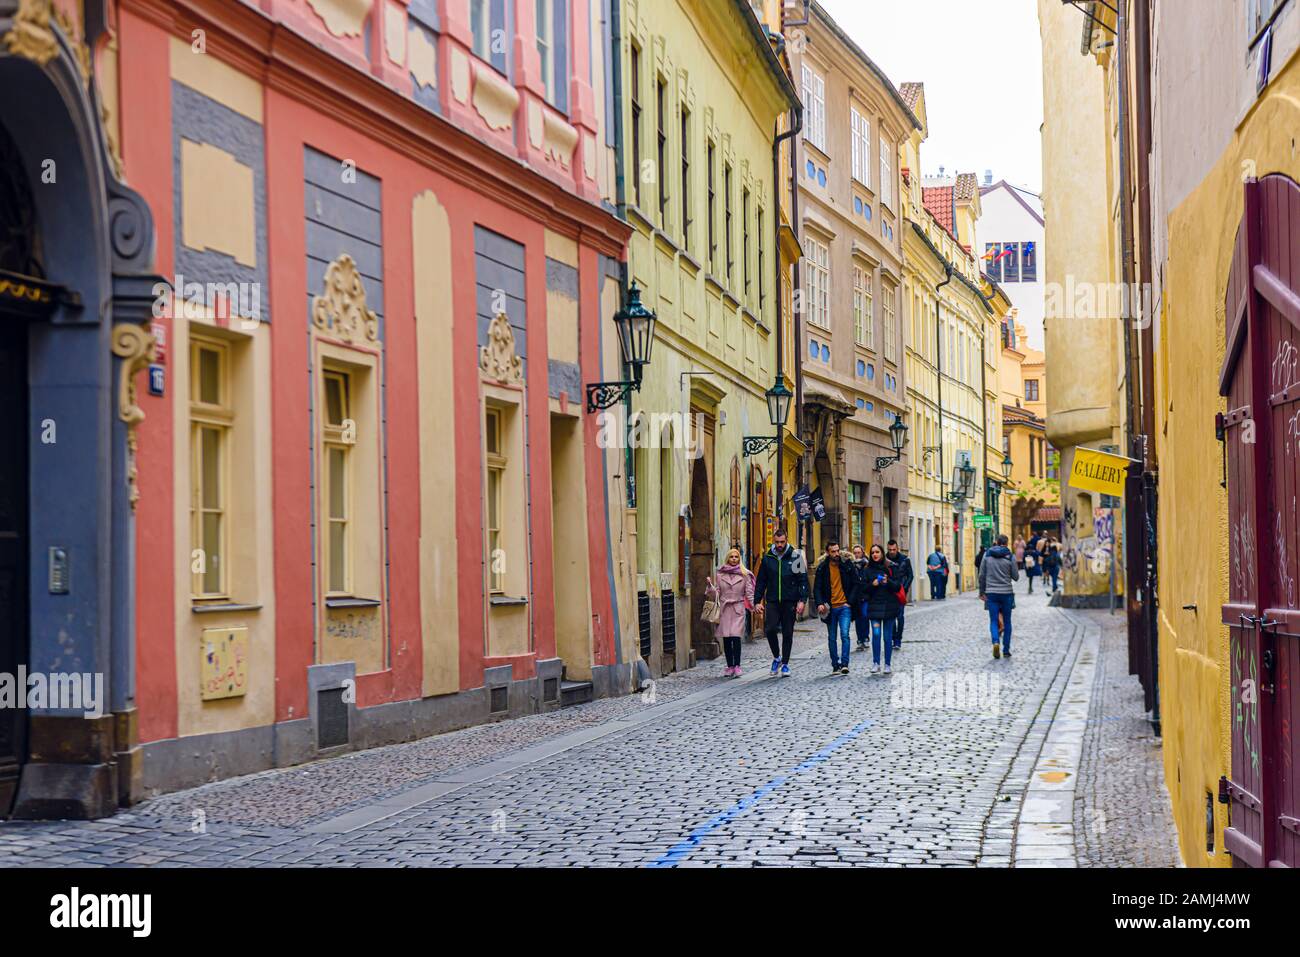 Traditional cobbled street with ornate buildings, Prague, Czech Republic Stock Photo